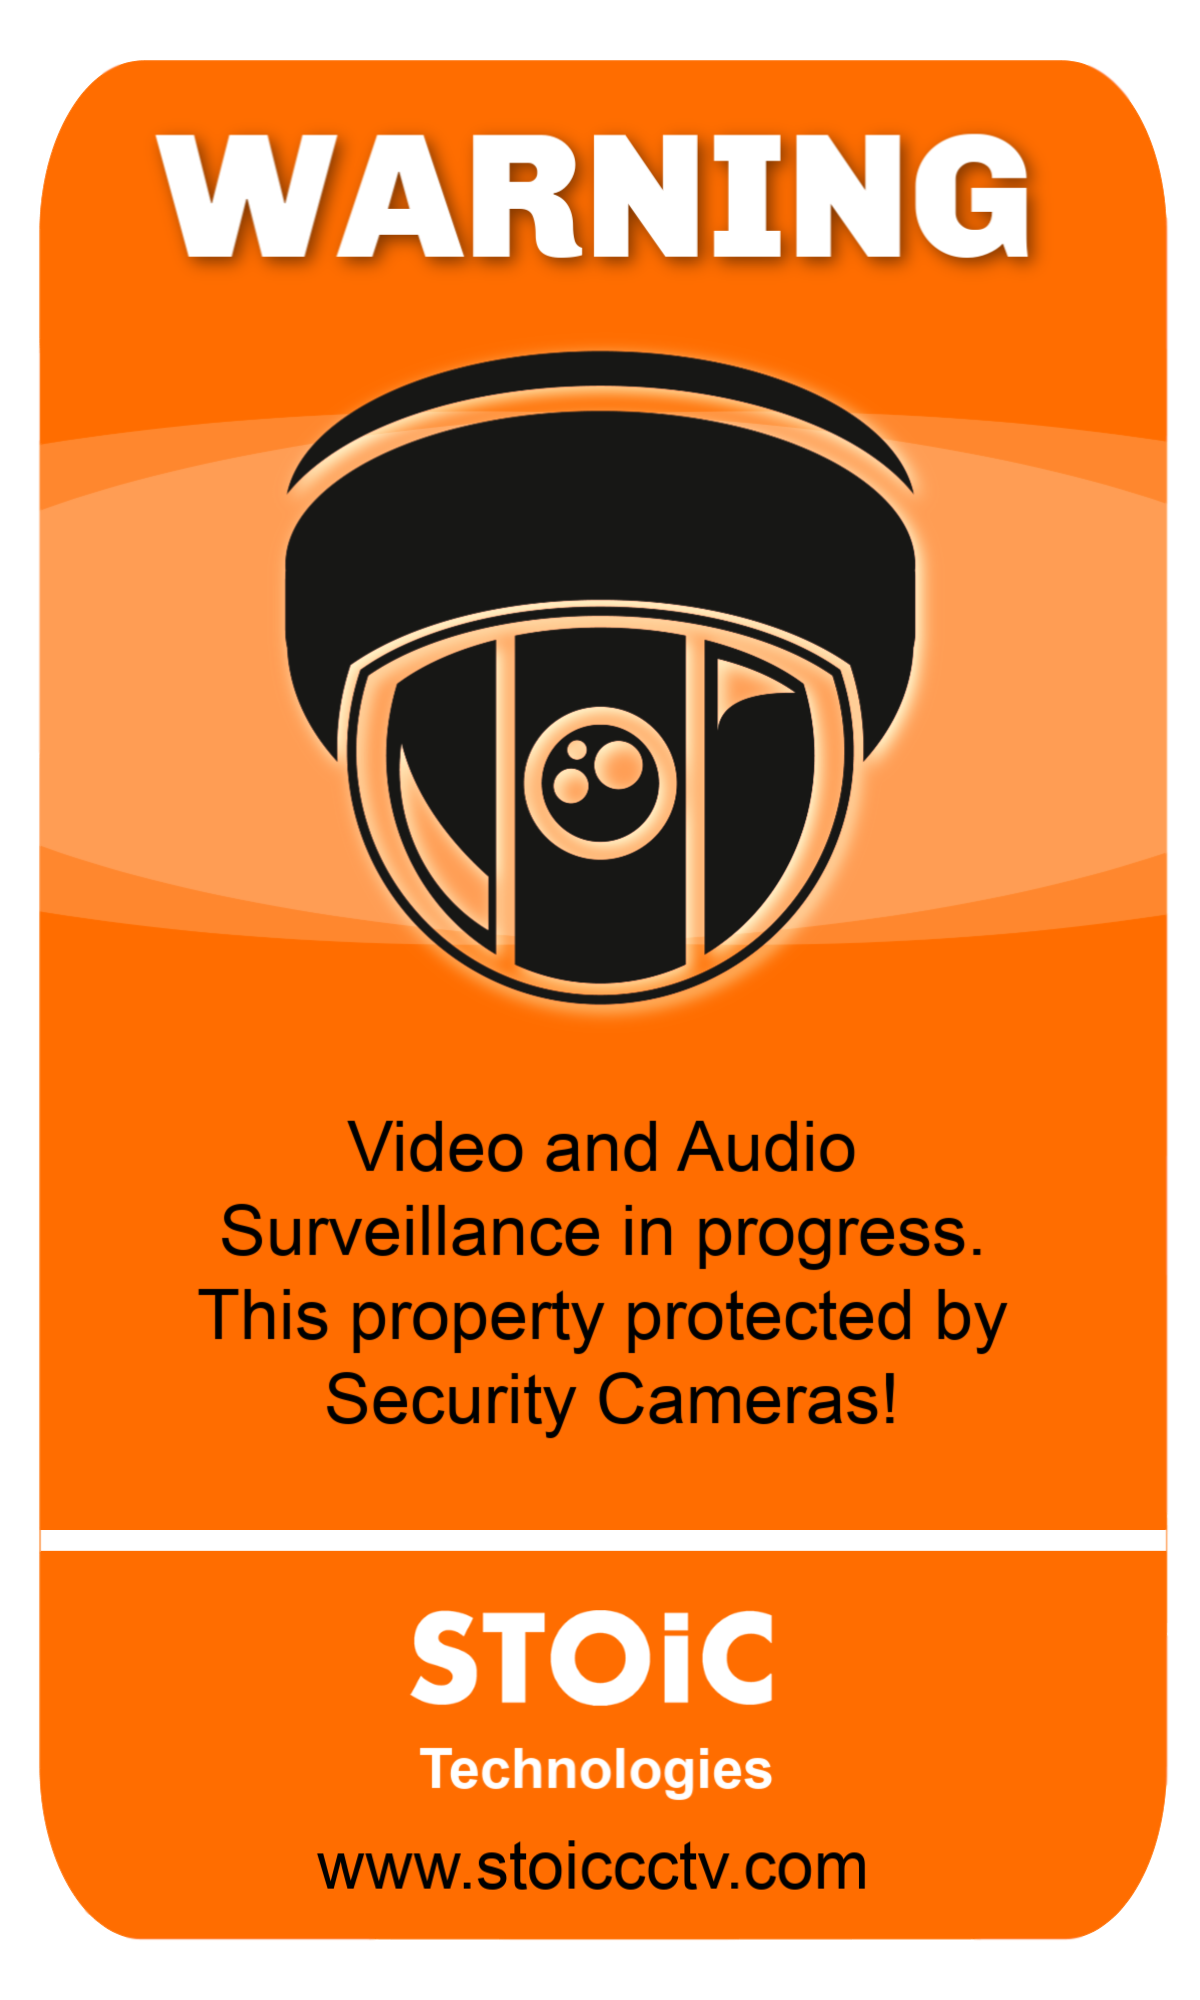 Camera Sticker Pack of 4-300mm x 100mm Warning Security MISC3 CCTV Sign